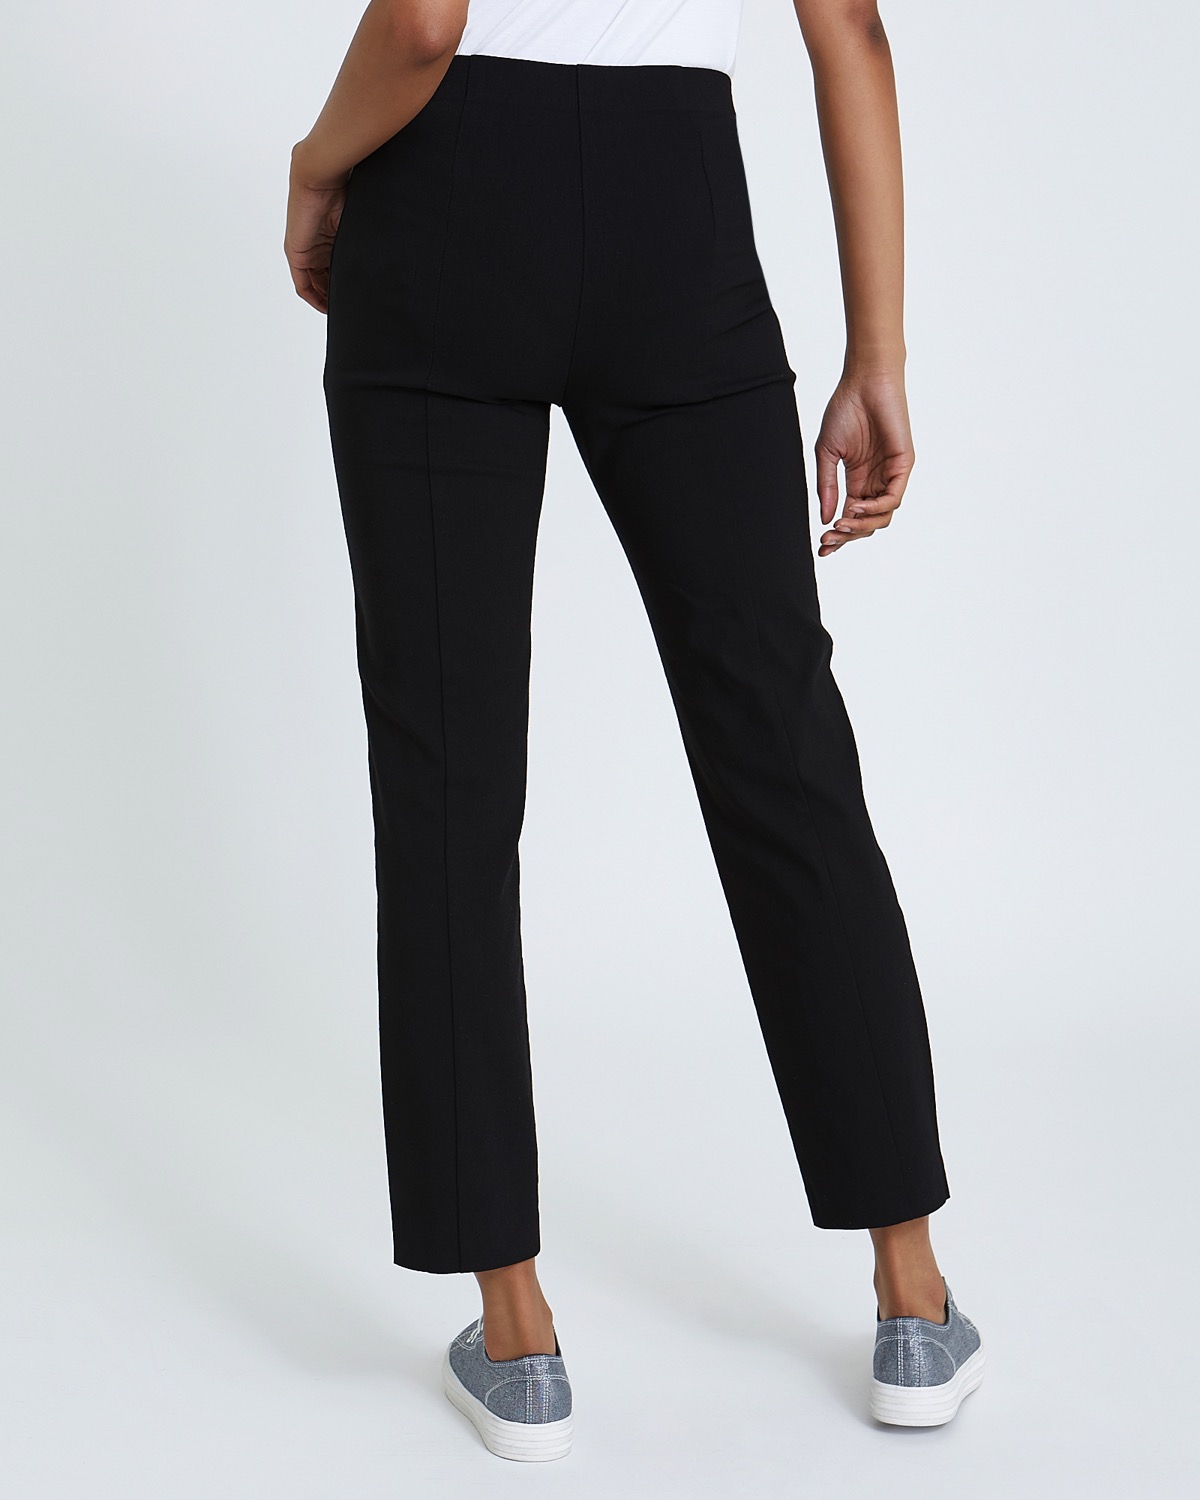 Cotton Stretch Trousers - Trousers - Damart.co.uk